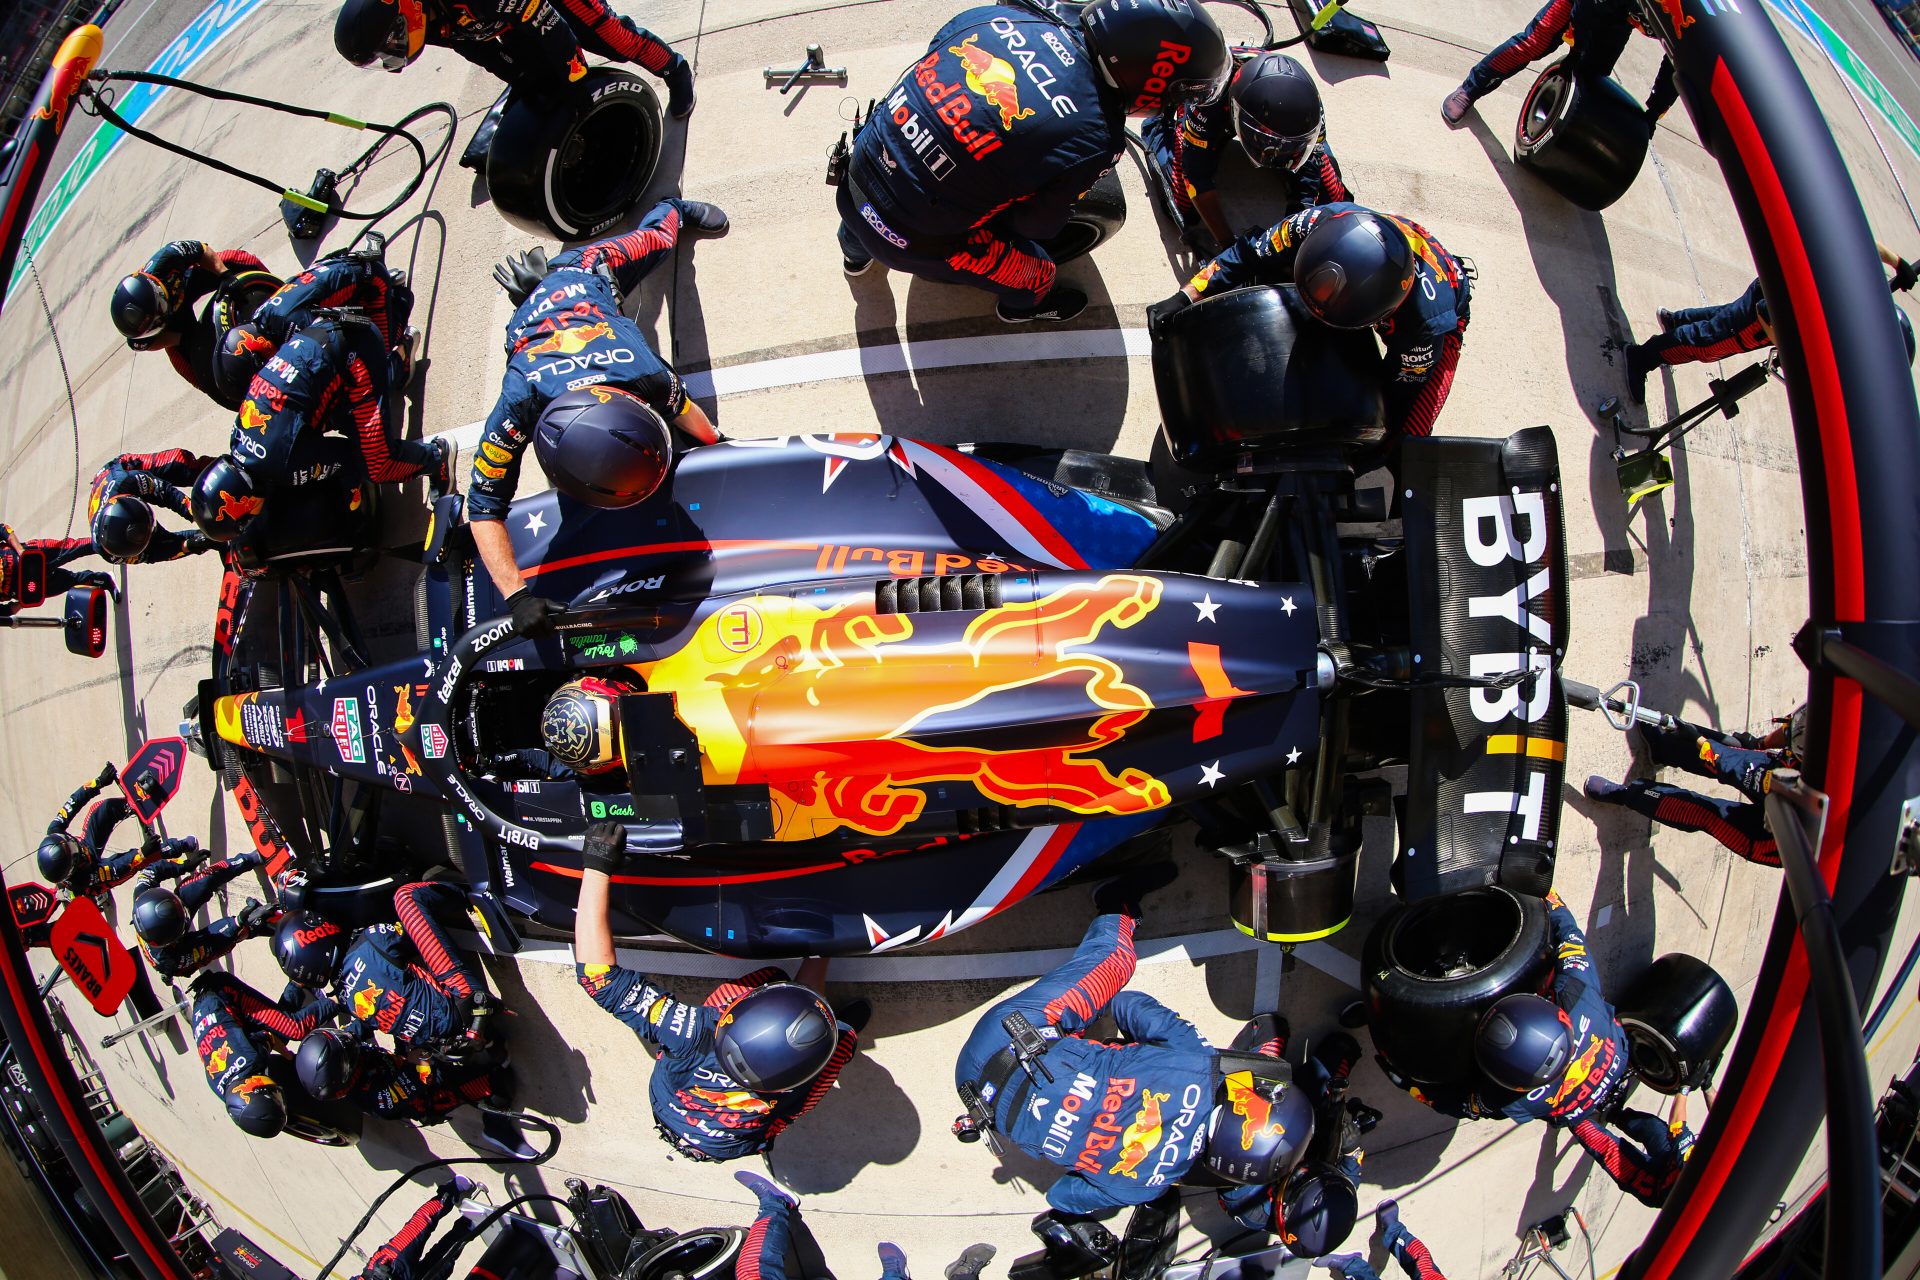 The Oracle pit crew attends to a race car in the pits. The fisheye overhead perspective distorts the view, capturing all 22 pit workers as they race to swap tires and fuel the vehicle, which sits at the core of the photo with its large red bull logo in the center.